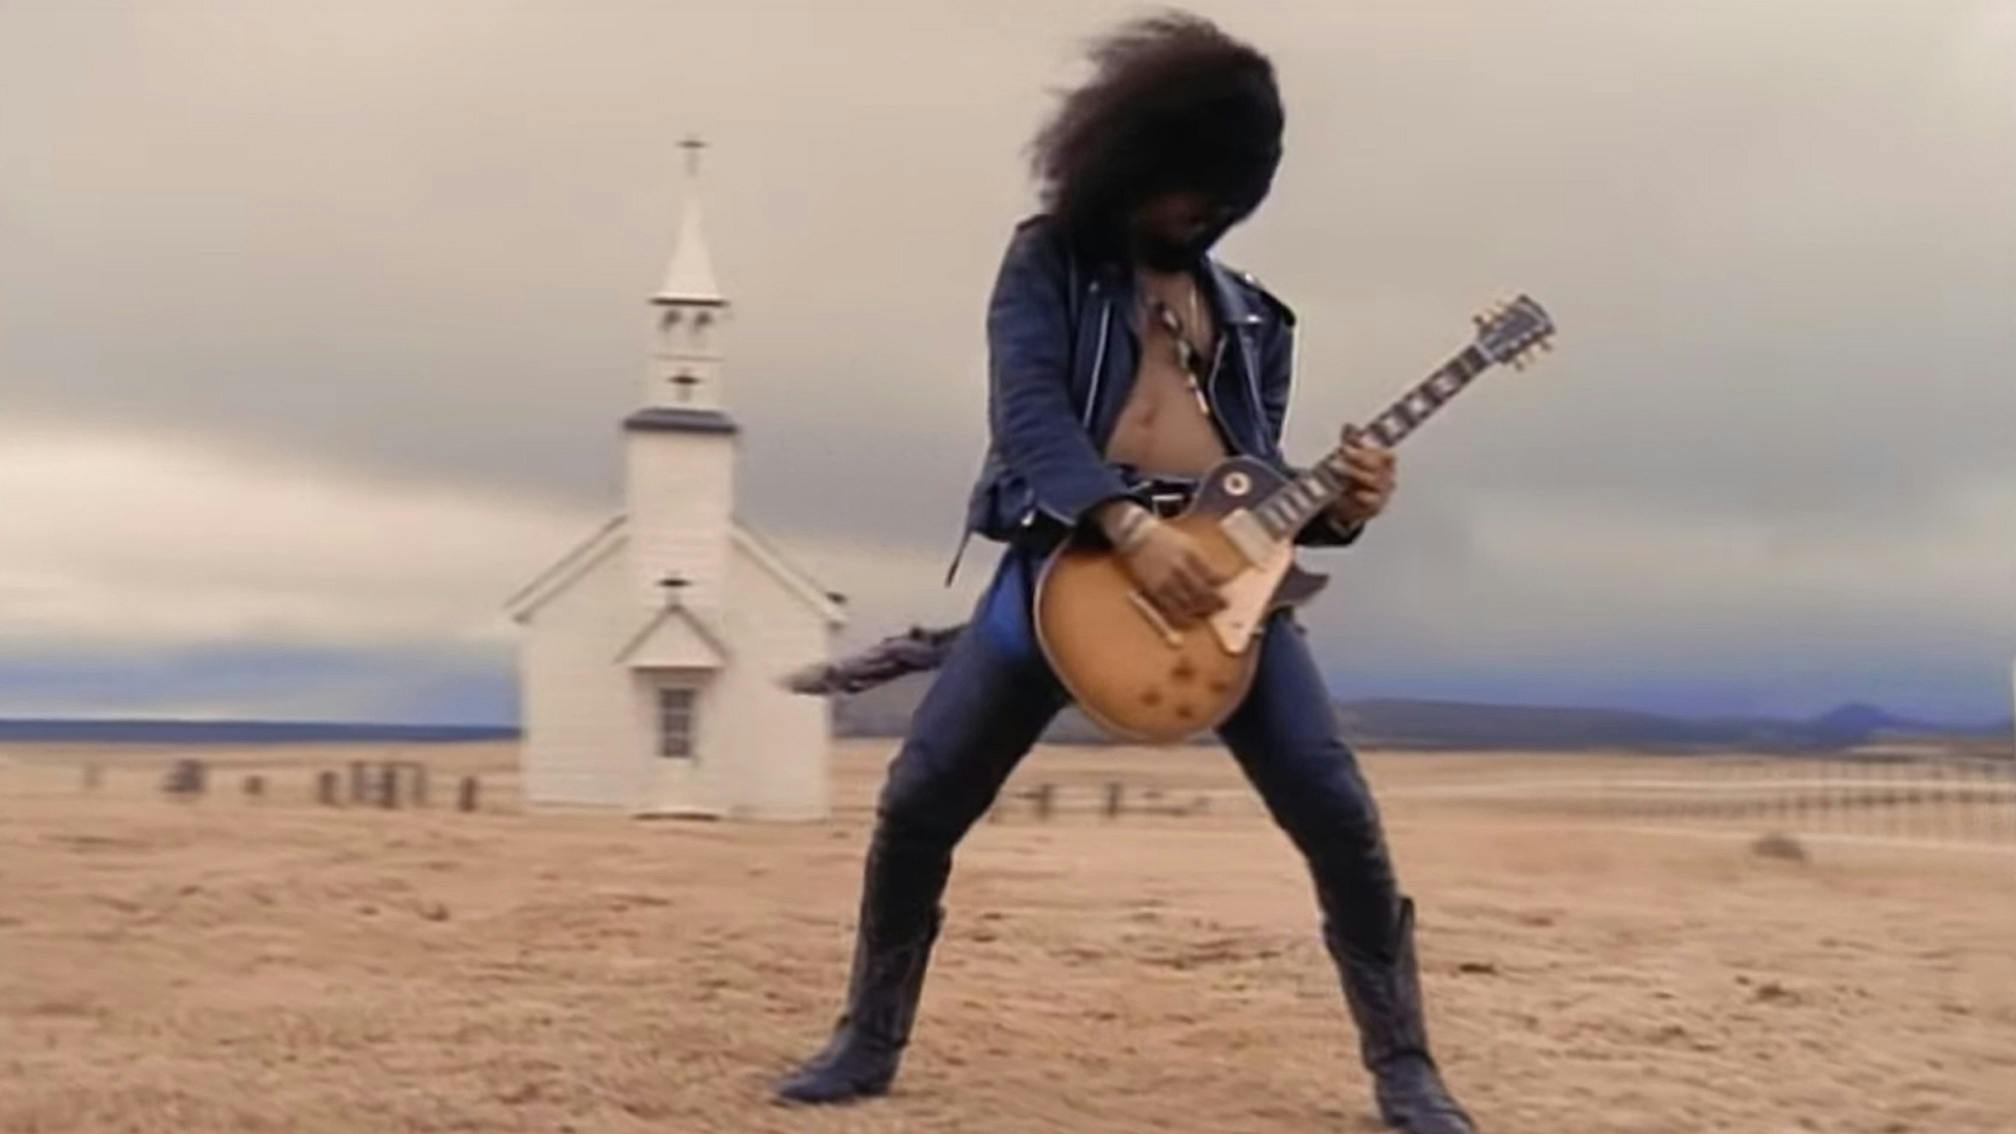 November Rain Is The "Greatest Music Video Of All Time" According To Donald Trump